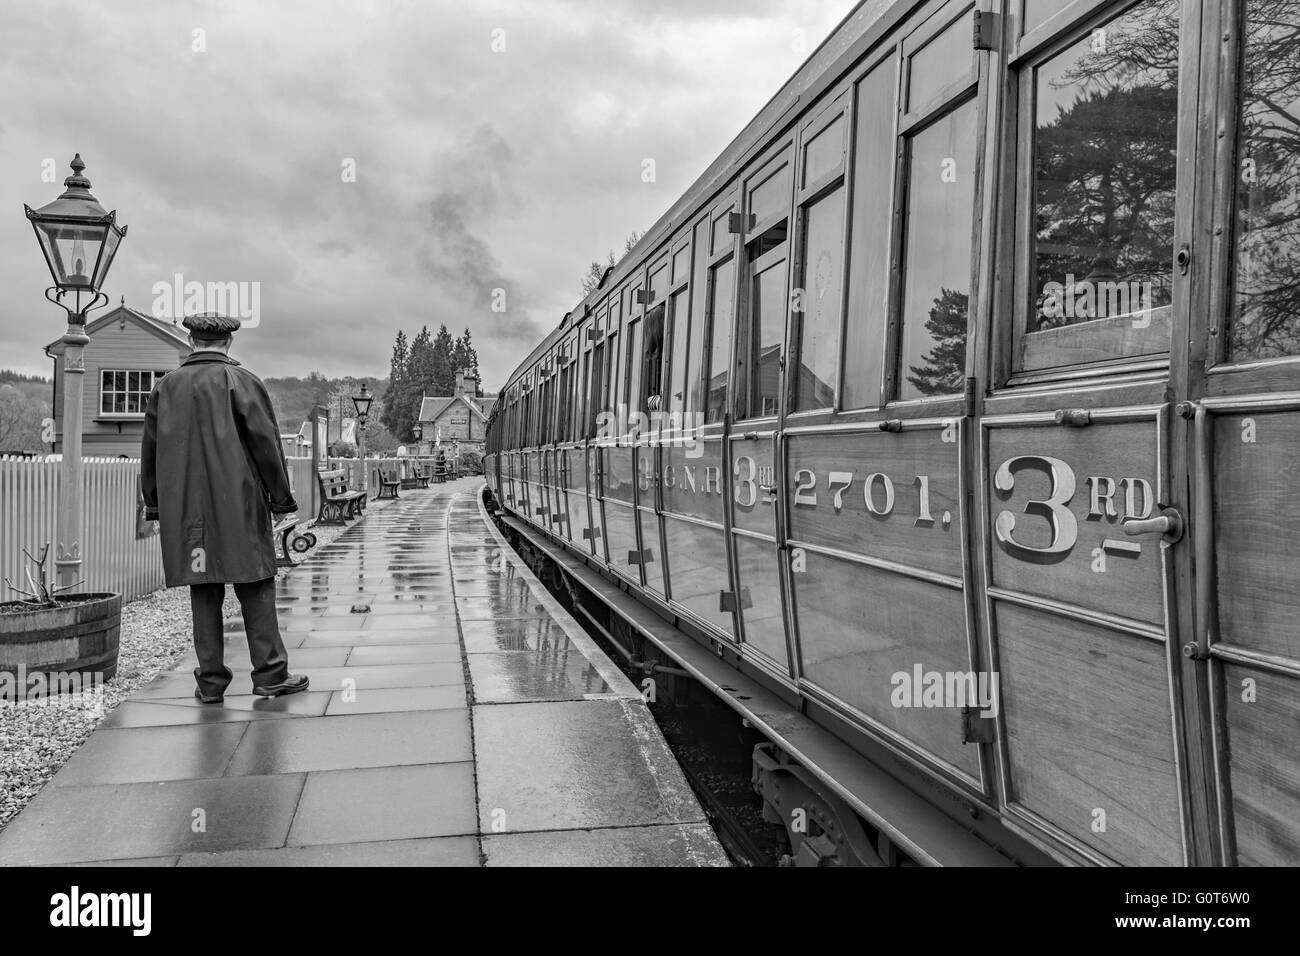 Arley train Station on the Severn Valley Railway in monochrome, Worcestershire, England, UK Stock Photo